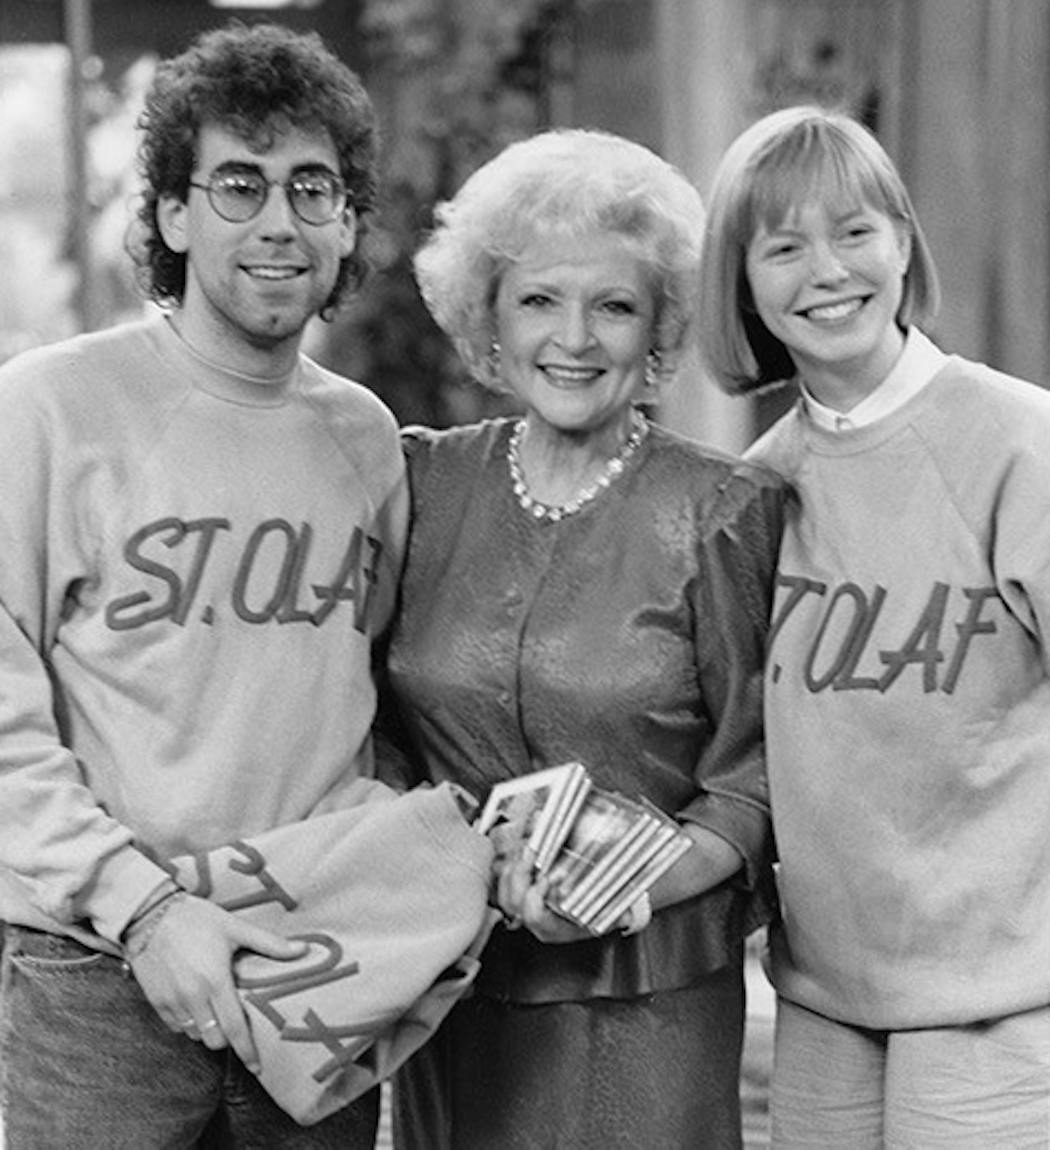 Betty White posed with members of the St. Olaf College choir in 1989 when they visited a 